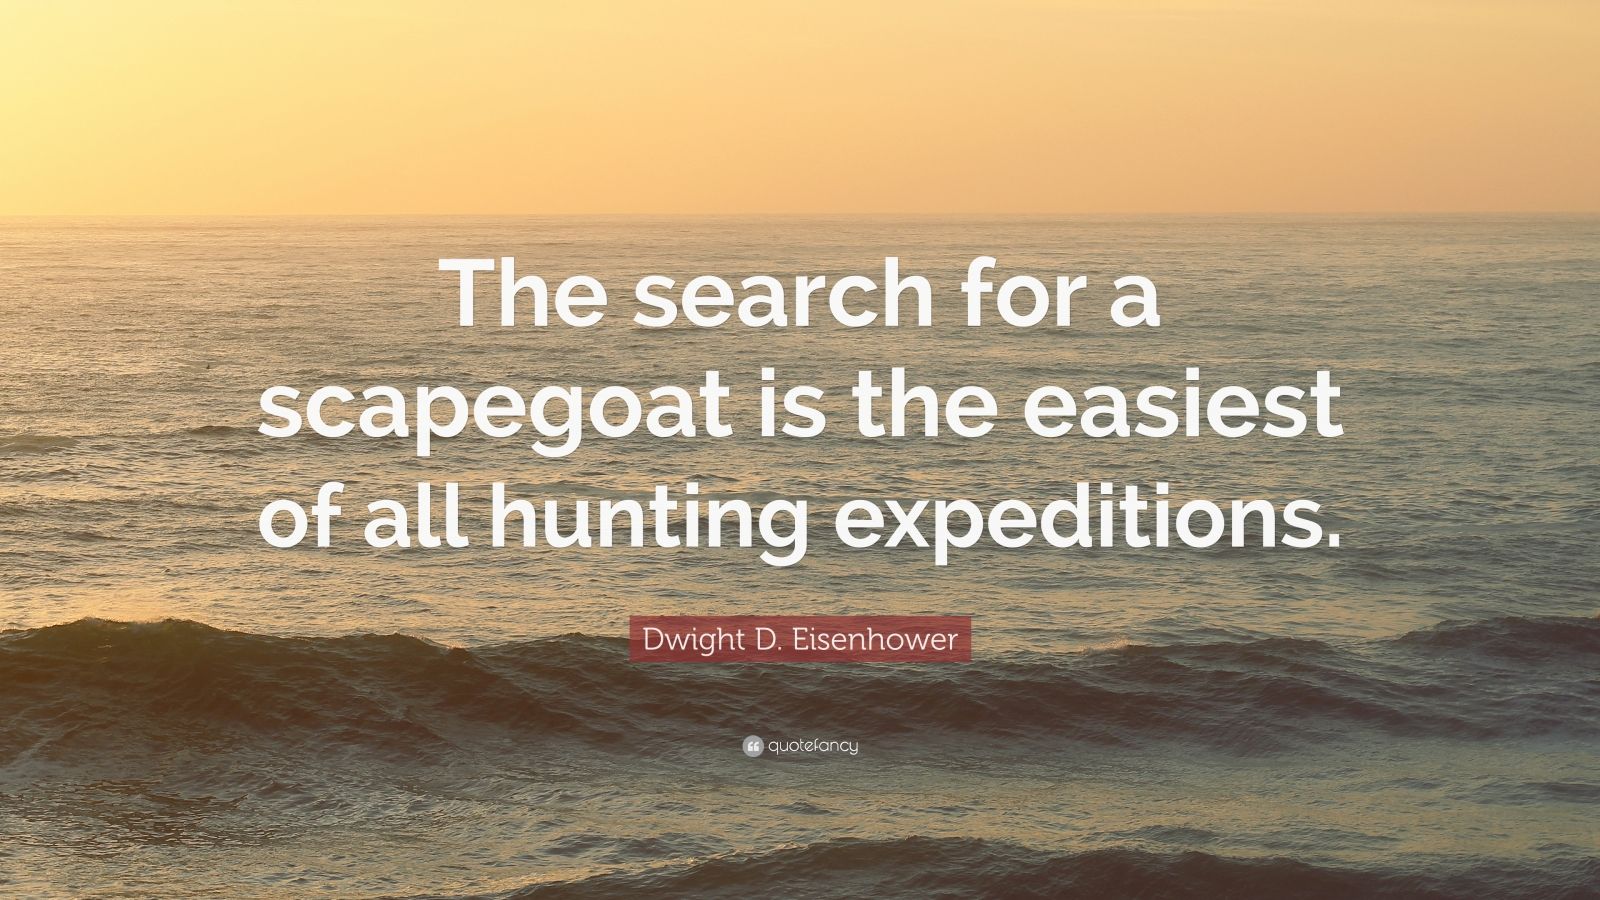 Dwight D. Eisenhower Quote: "The search for a scapegoat is the easiest of all hunting ...